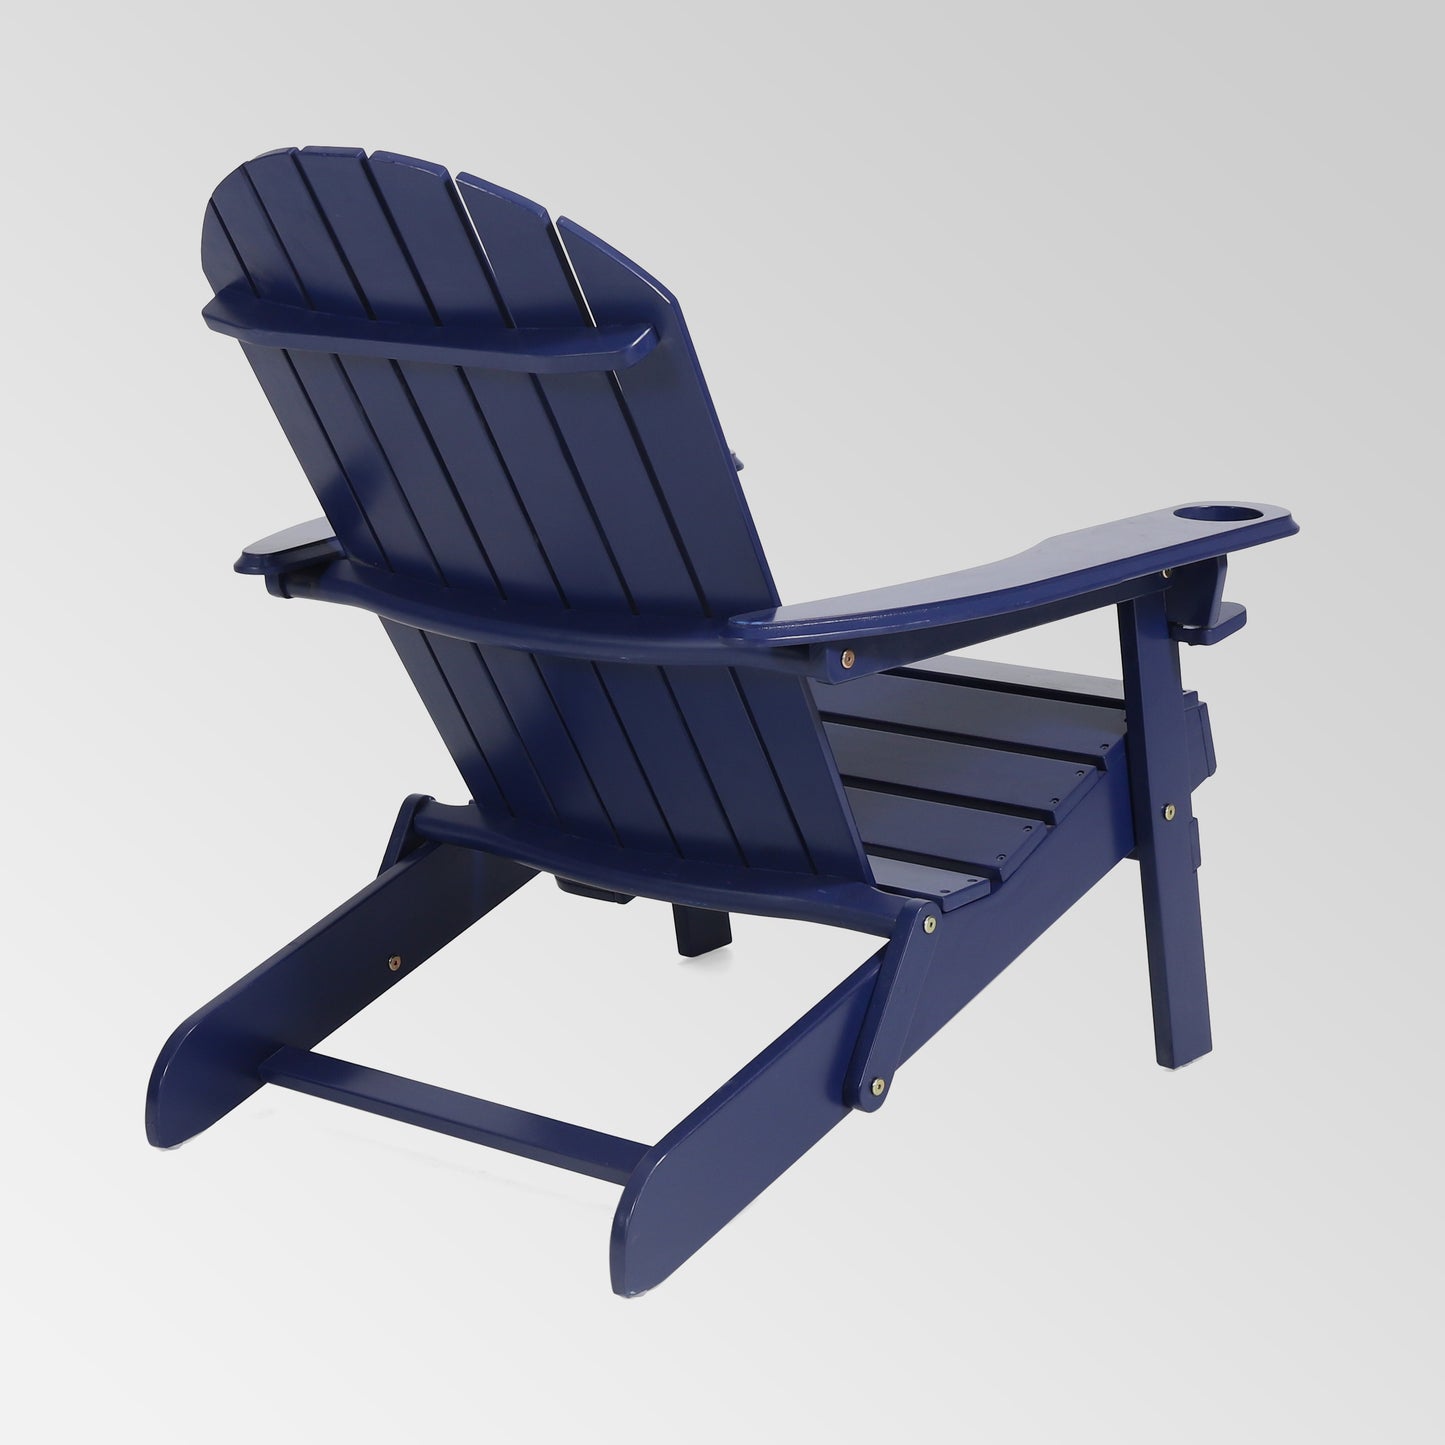 Outdoor Classic Solid Wood Adirondack Leisure Seat Can Put Cup Holder Can Put Umbrella